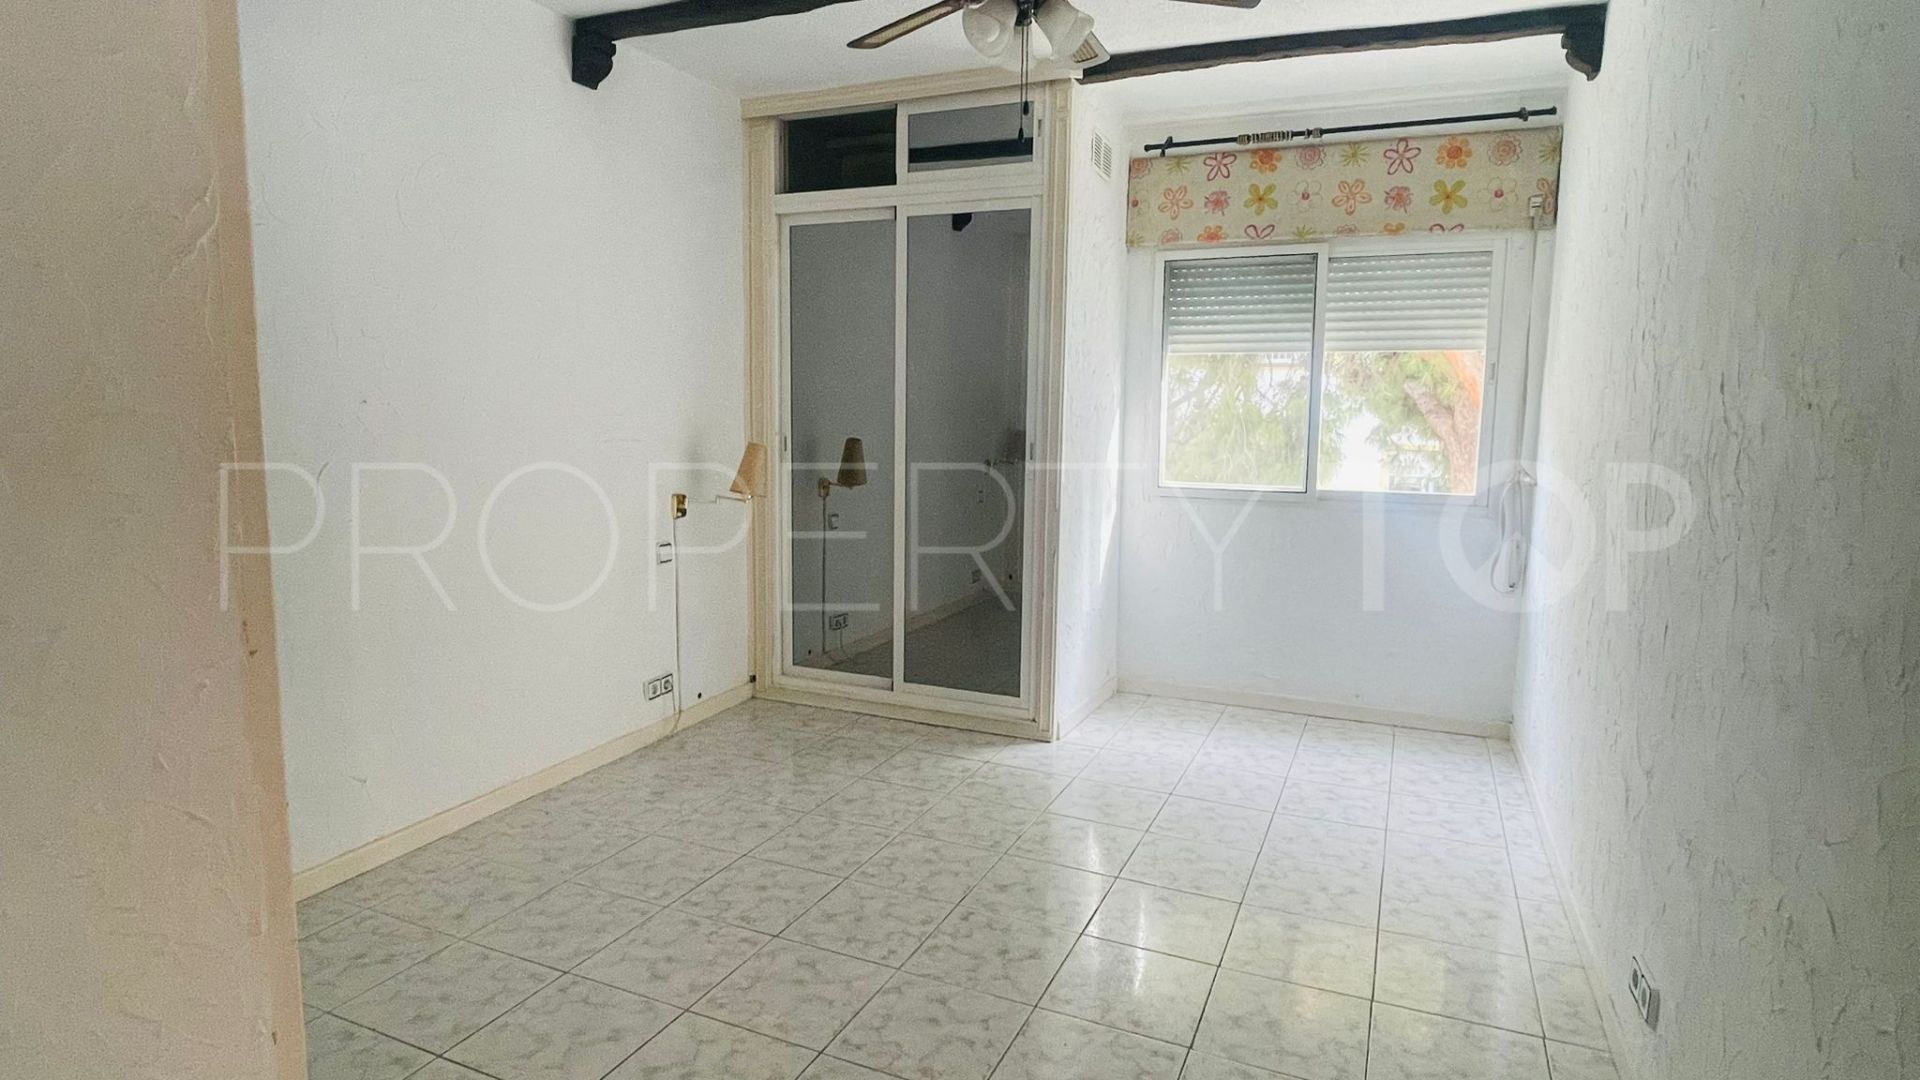 For sale apartment with 3 bedrooms in S. Pedro Centro